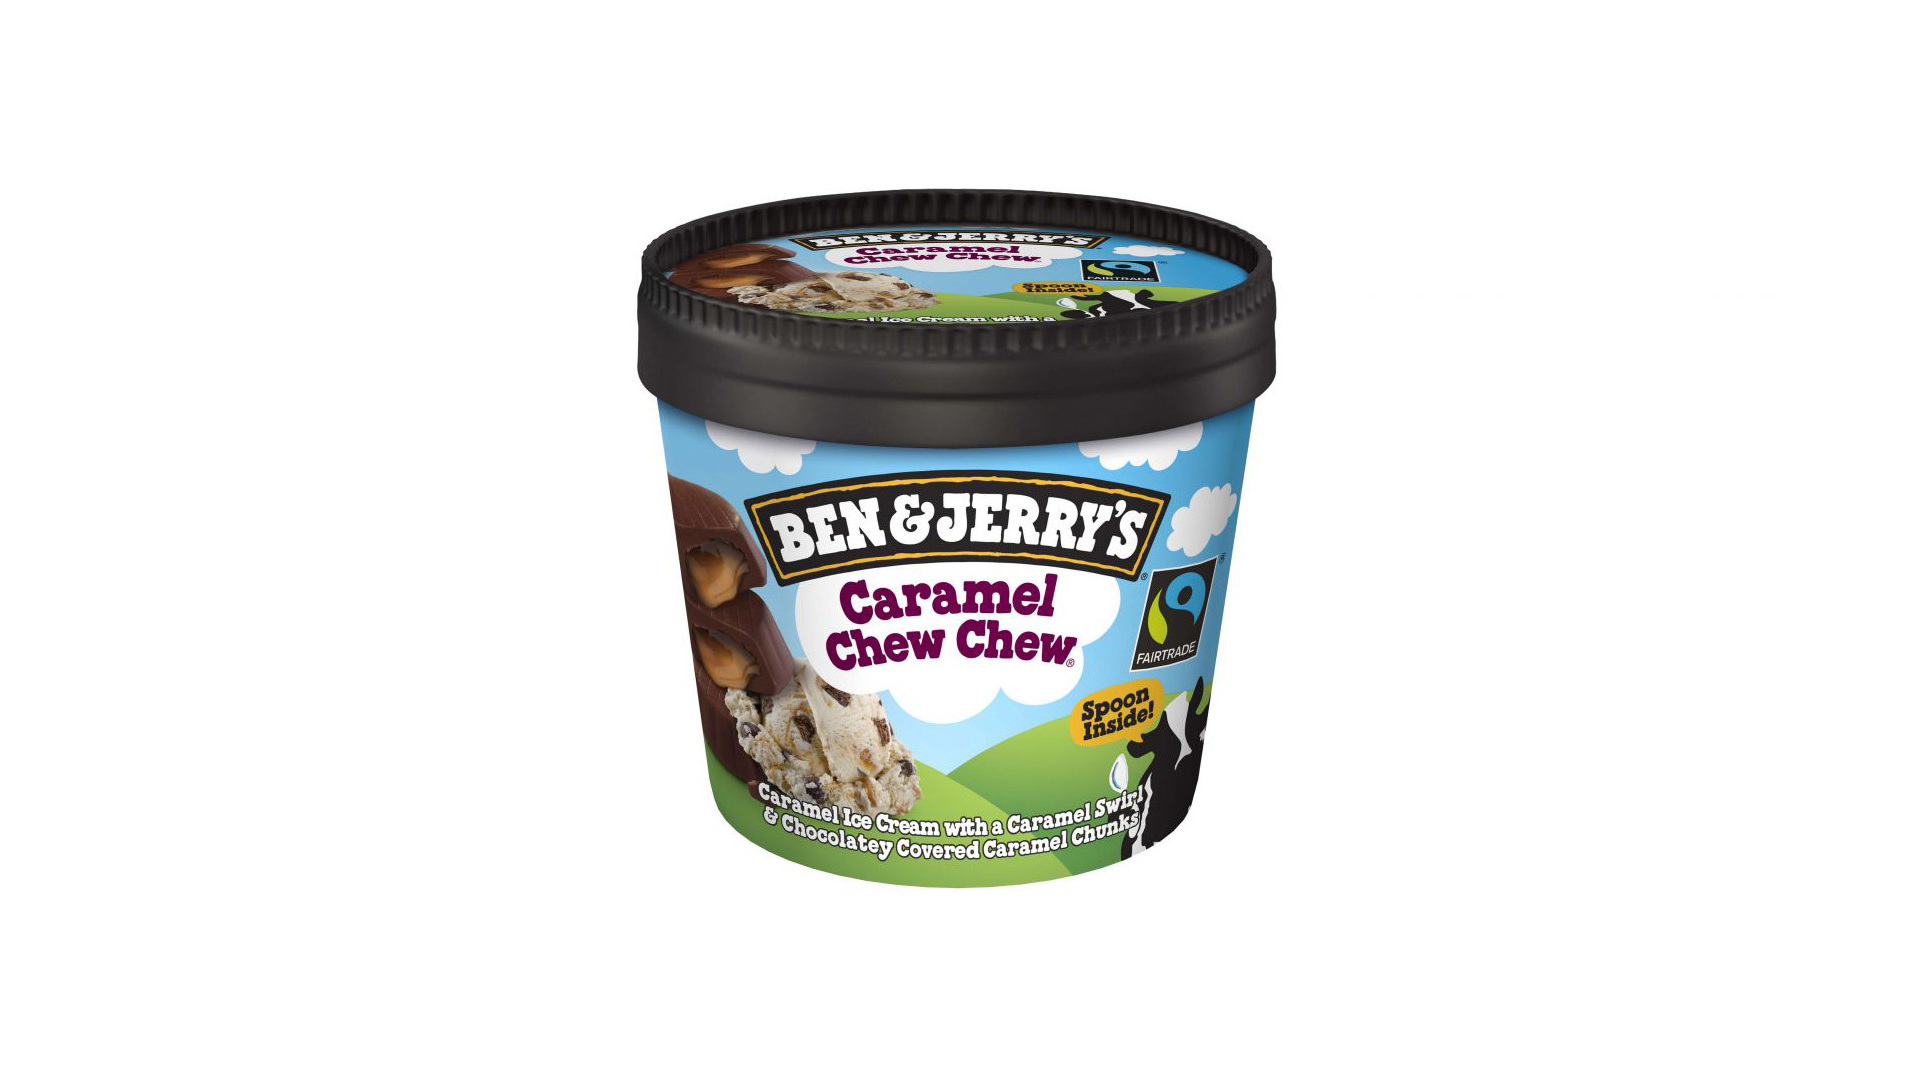 Ben & Jerry's Caramel Chew Chew 100ml - Burger Collection in Clayhall IG5